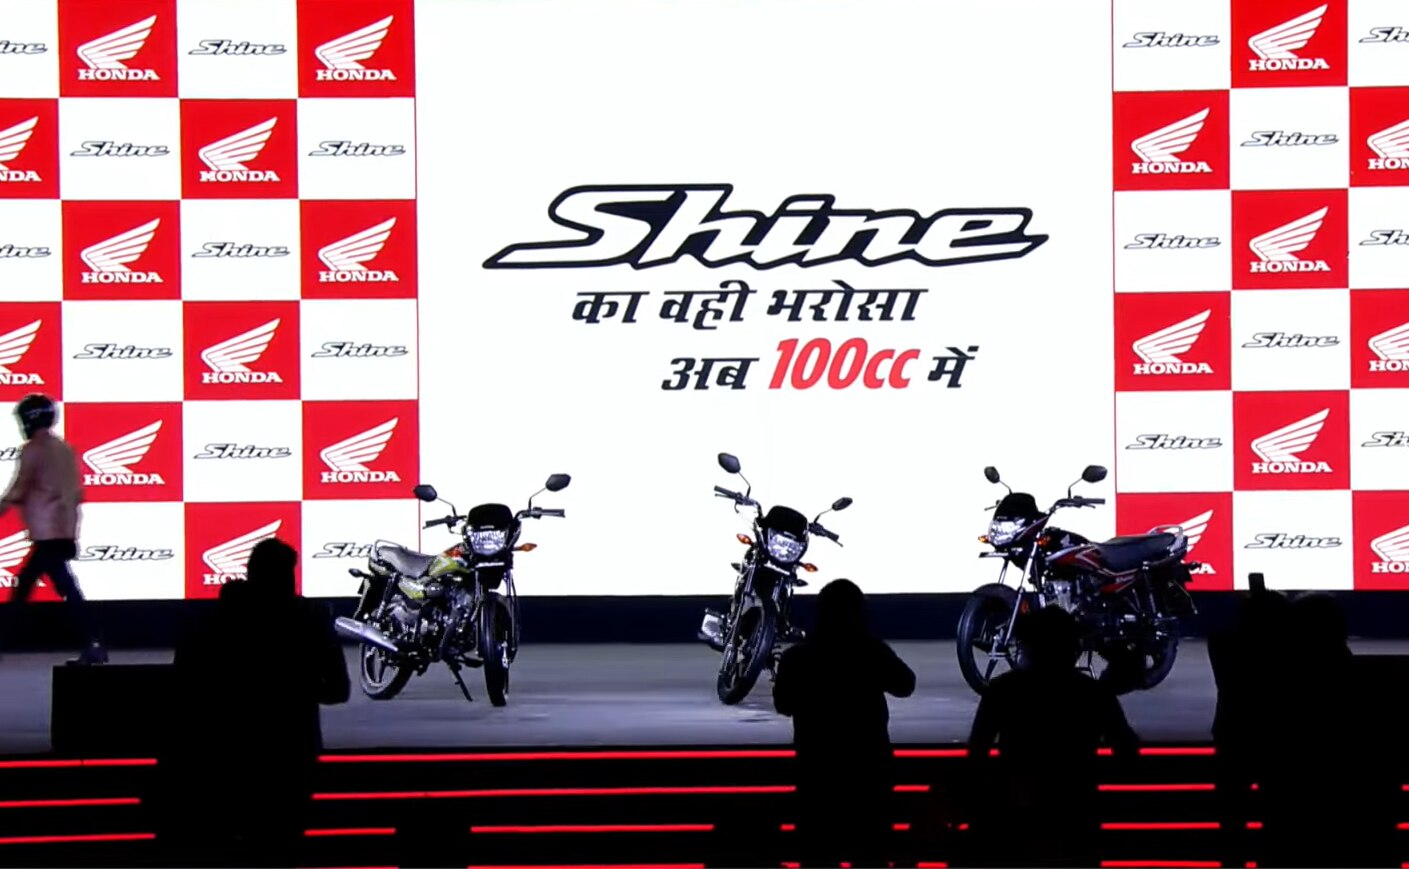 Honda Shine 100 Motorcycle Launched at Rs 64,900: Check Features, Design and Color Variants